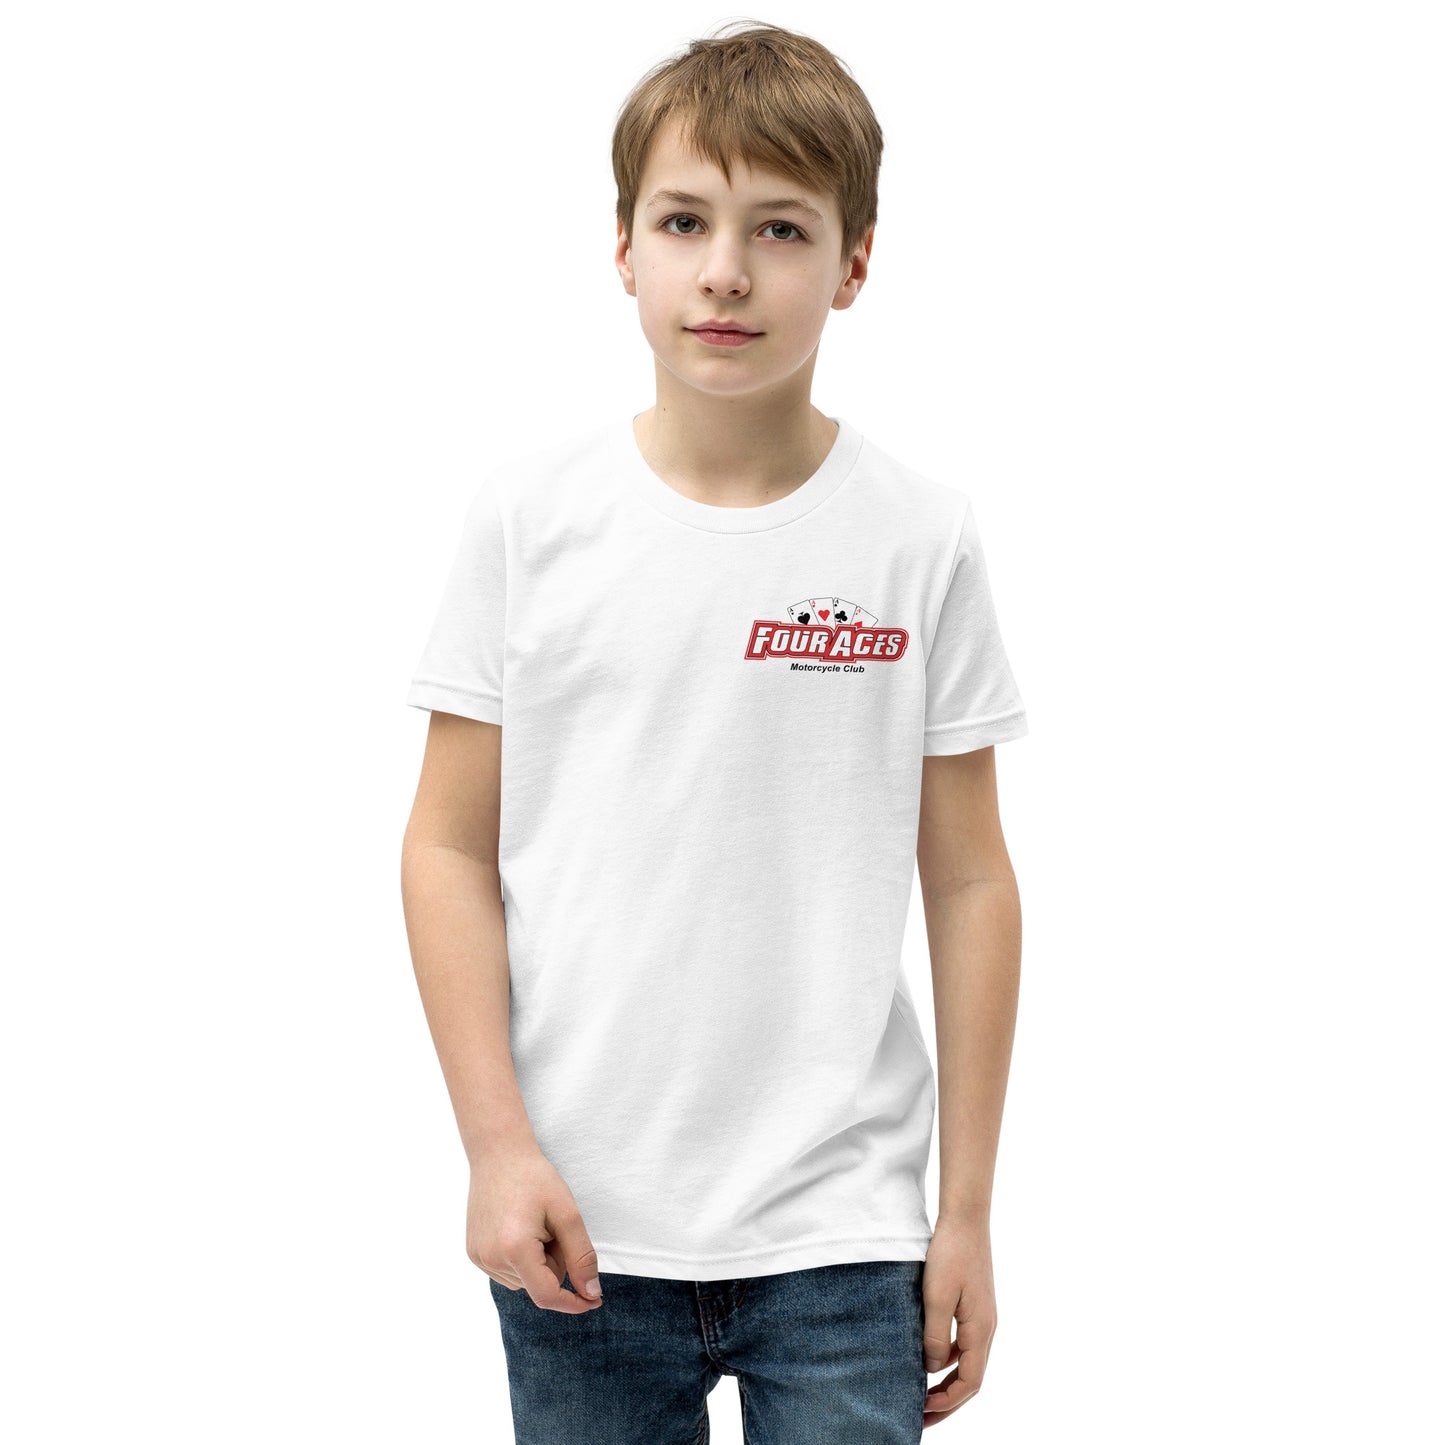 4 Aces White Youth Club T-Shirt